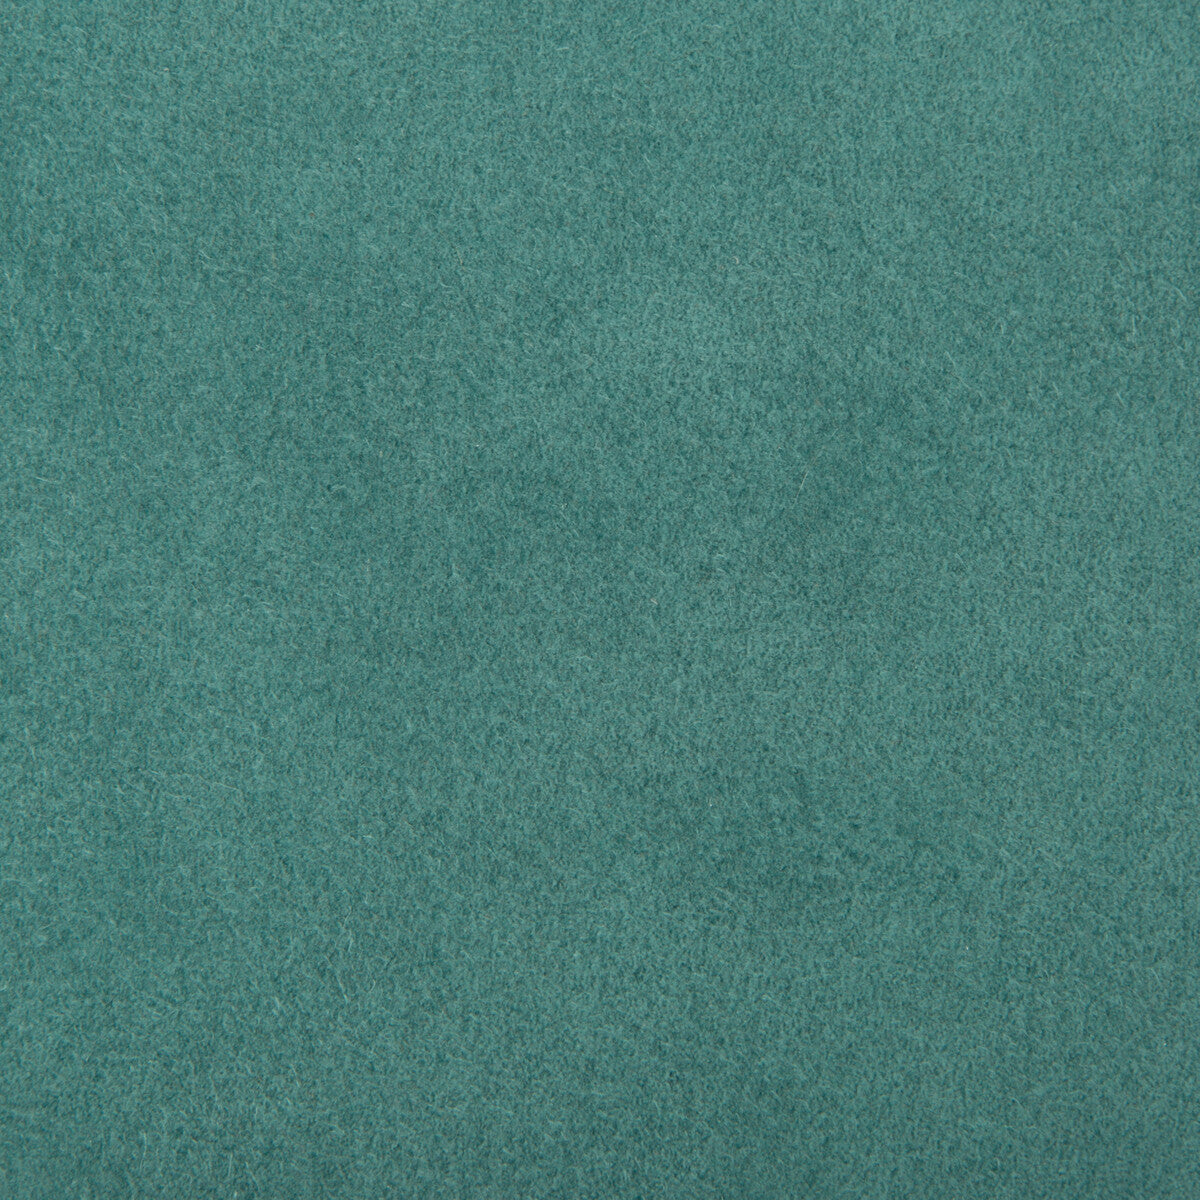 Ultrasuede fabric in peacock color - pattern ULTRASUEDE.35.0 - by Kravet Design in the Ultrasuede collection